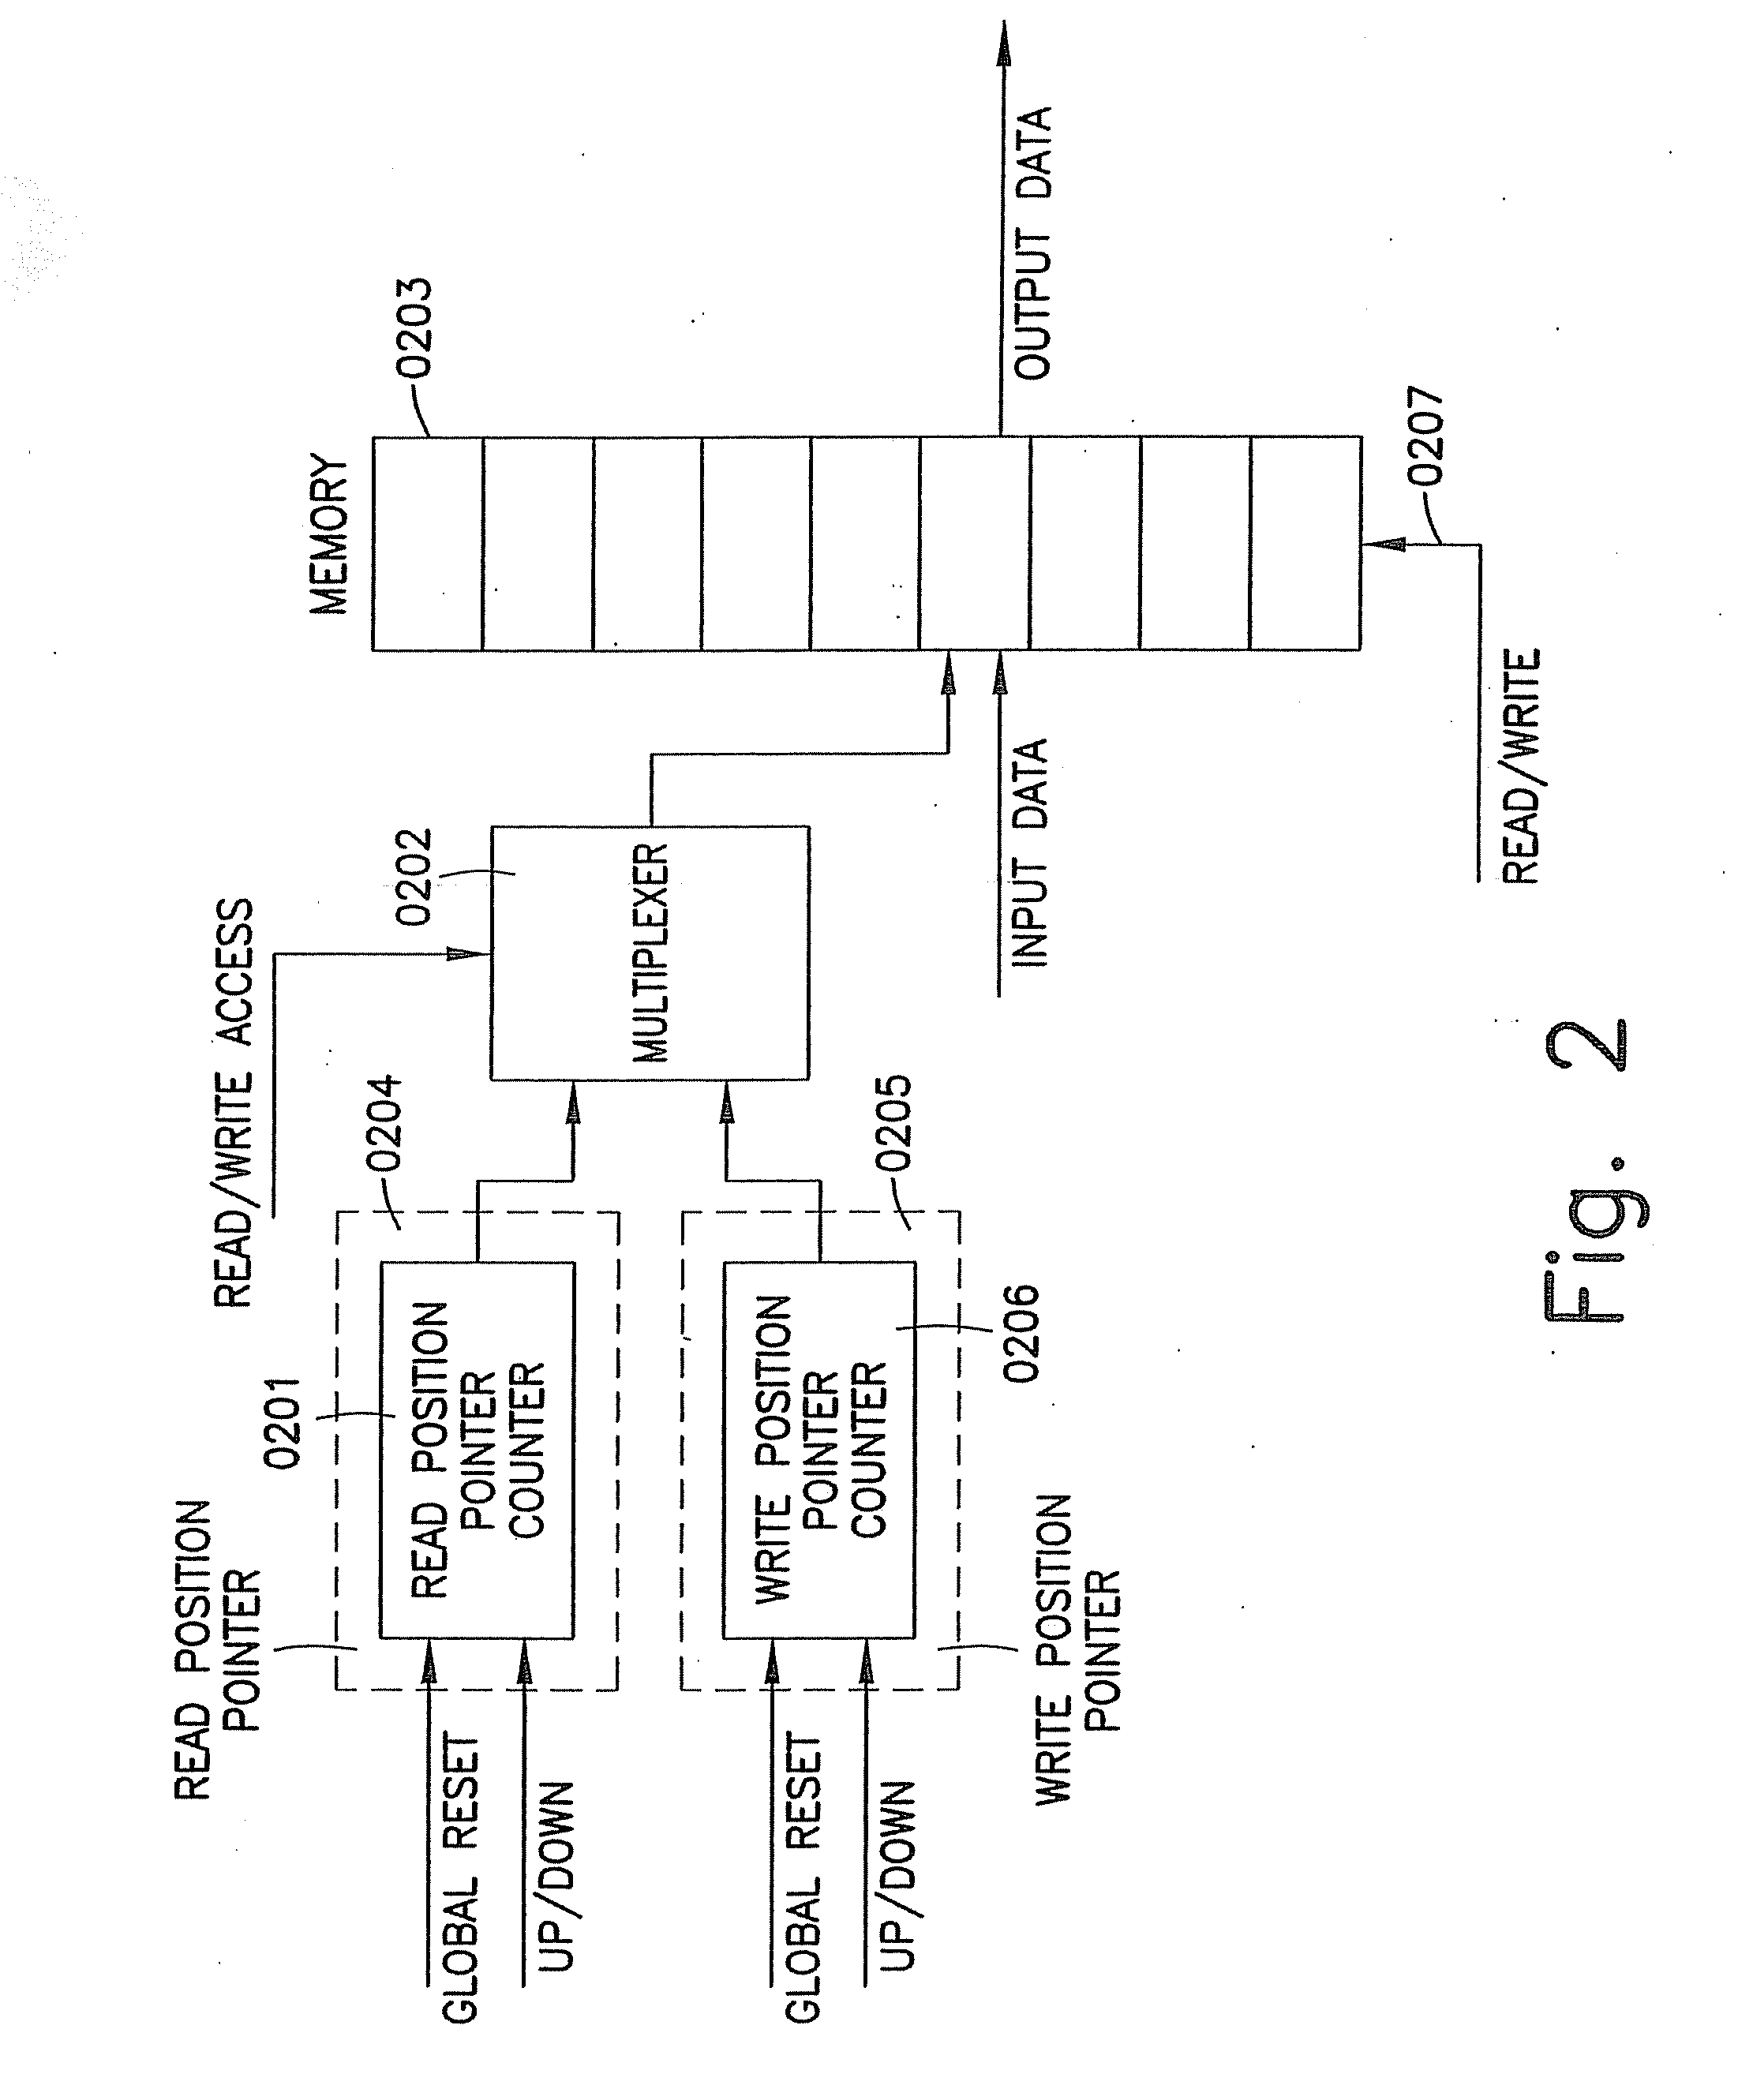 PROCESS FOR AUTOMATIC DYNAMIC RELOADING OF DATA FLOW PROCESSORS (DFPs) AND UNITS WITH TWO- OR THREE-DIMENSIONAL PROGRAMMABLE CELL ARCHITECTURES (FPGAs, DPGAs AND THE LIKE)